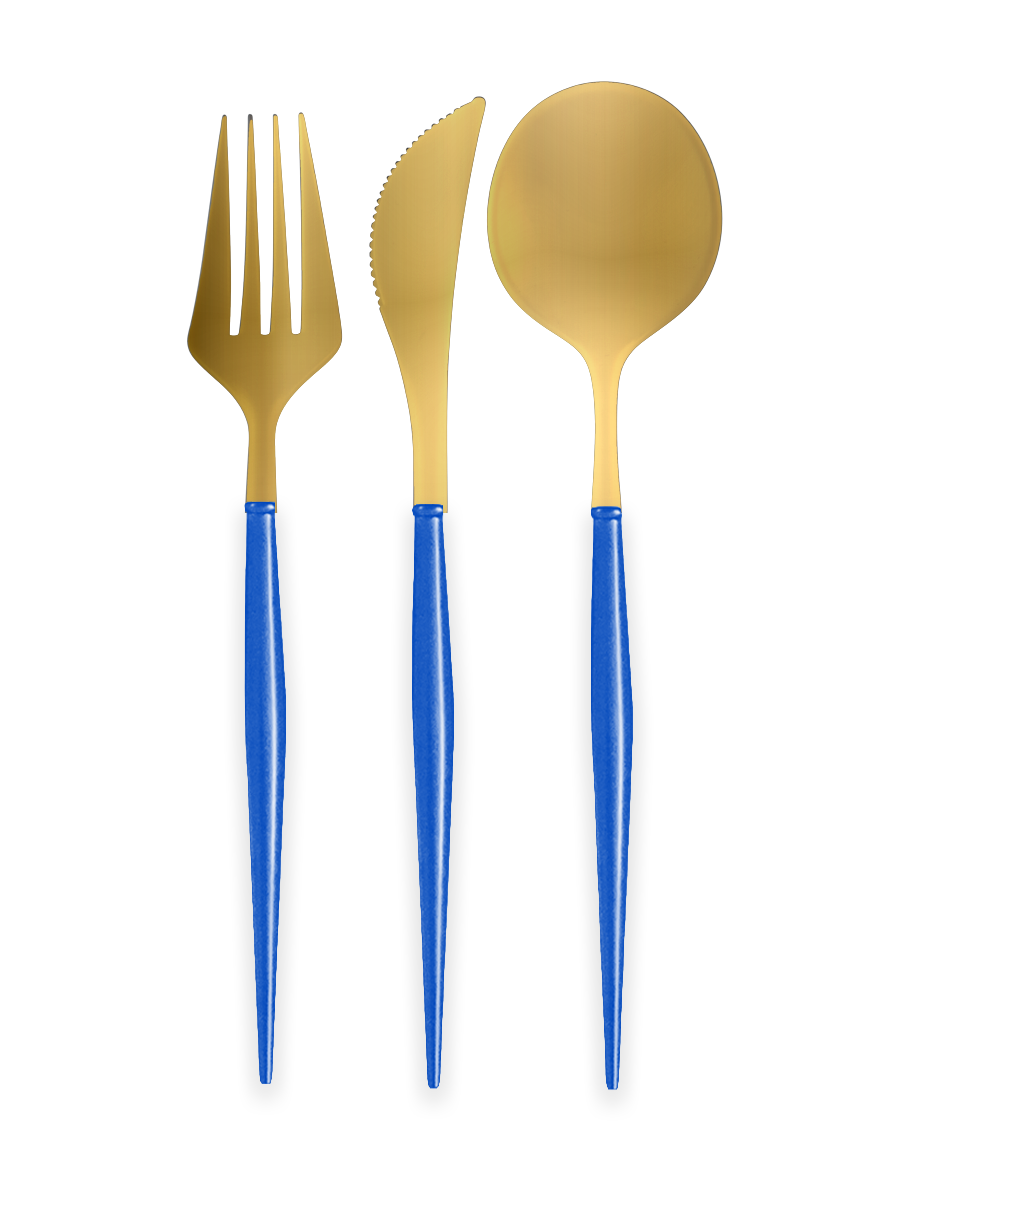 BELLA GOLD AND CHINA BLUE CUTLERY Sophistiplate Cutlery Bonjour Fete - Party Supplies